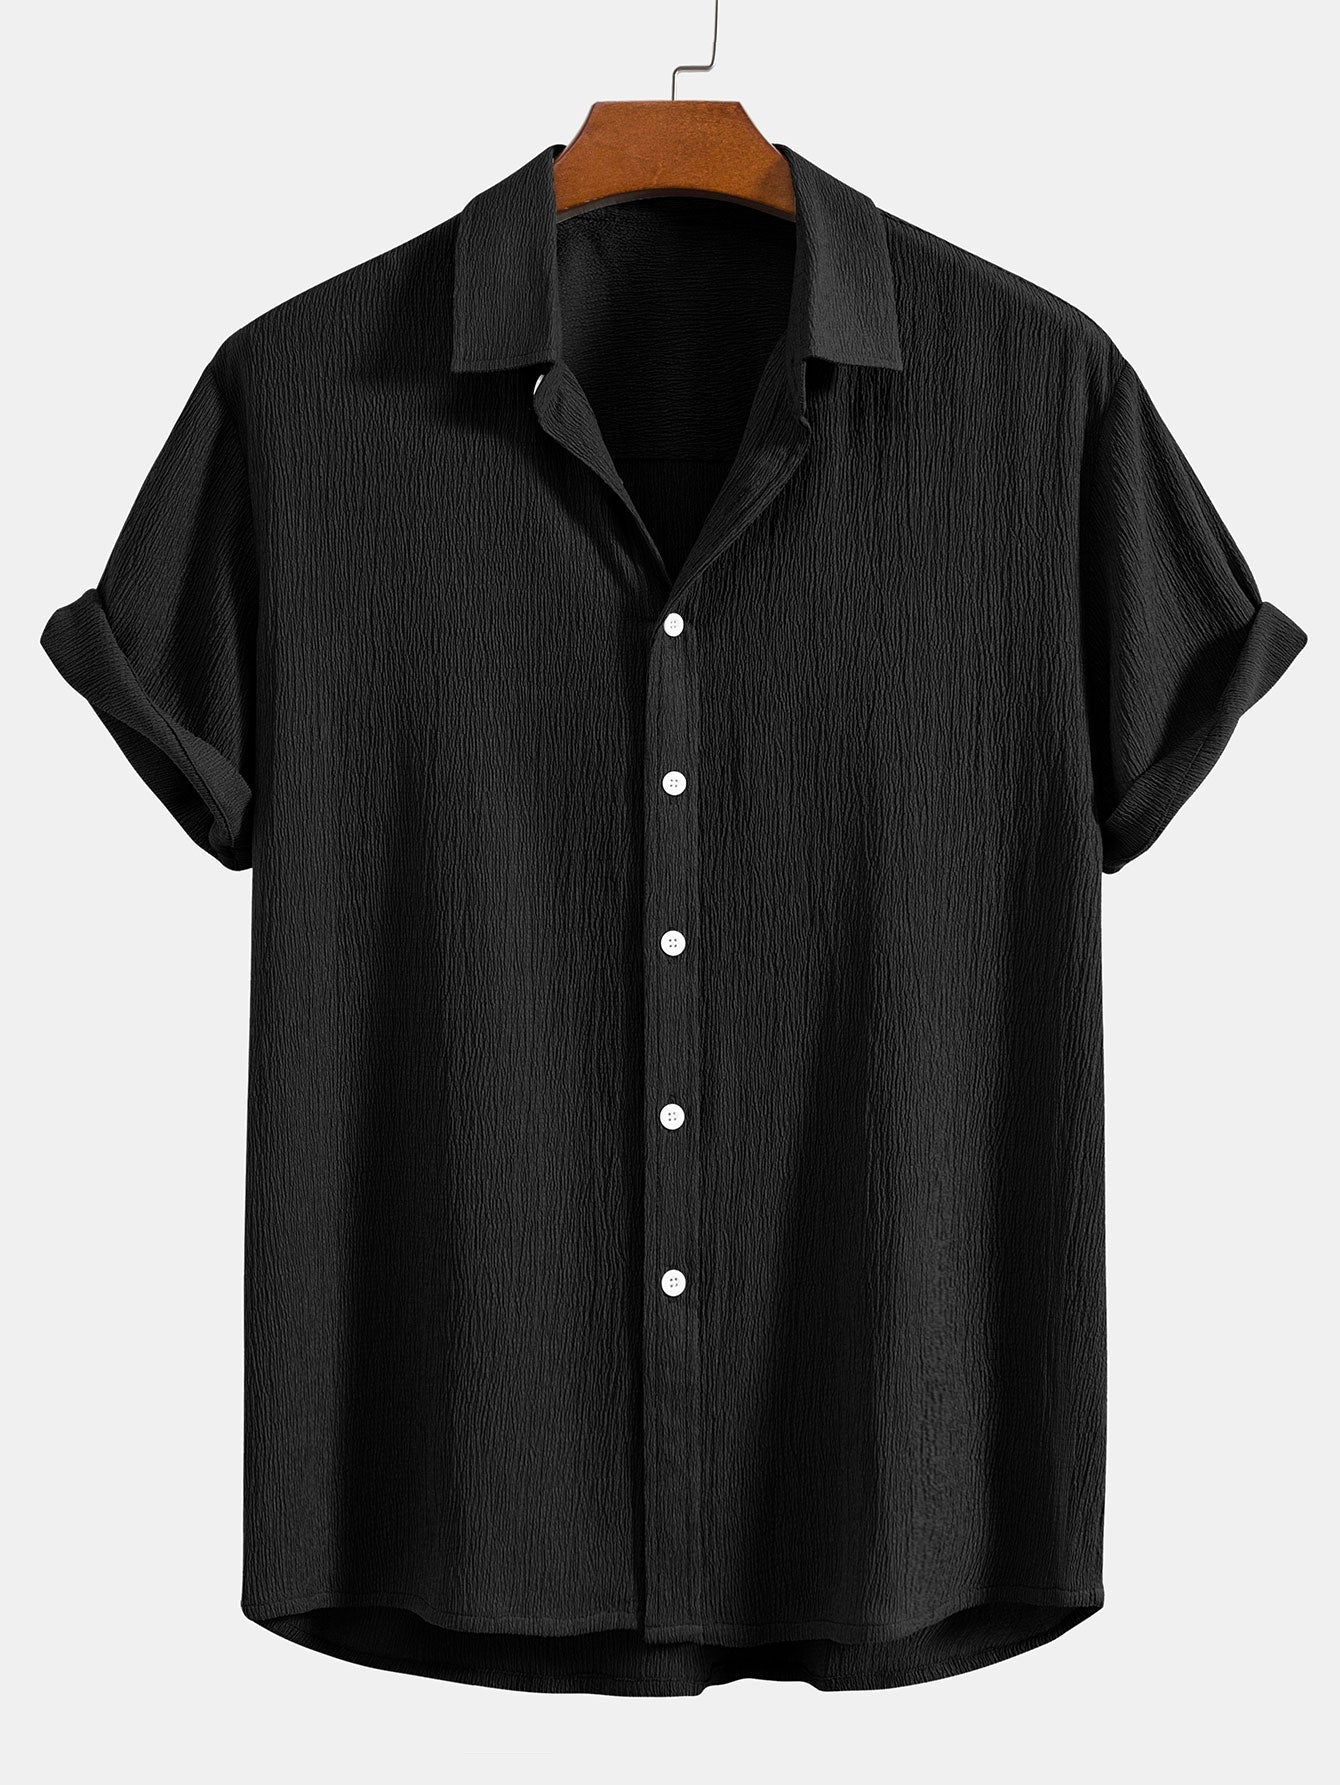 Wrinkled Textured Button Up Shirt